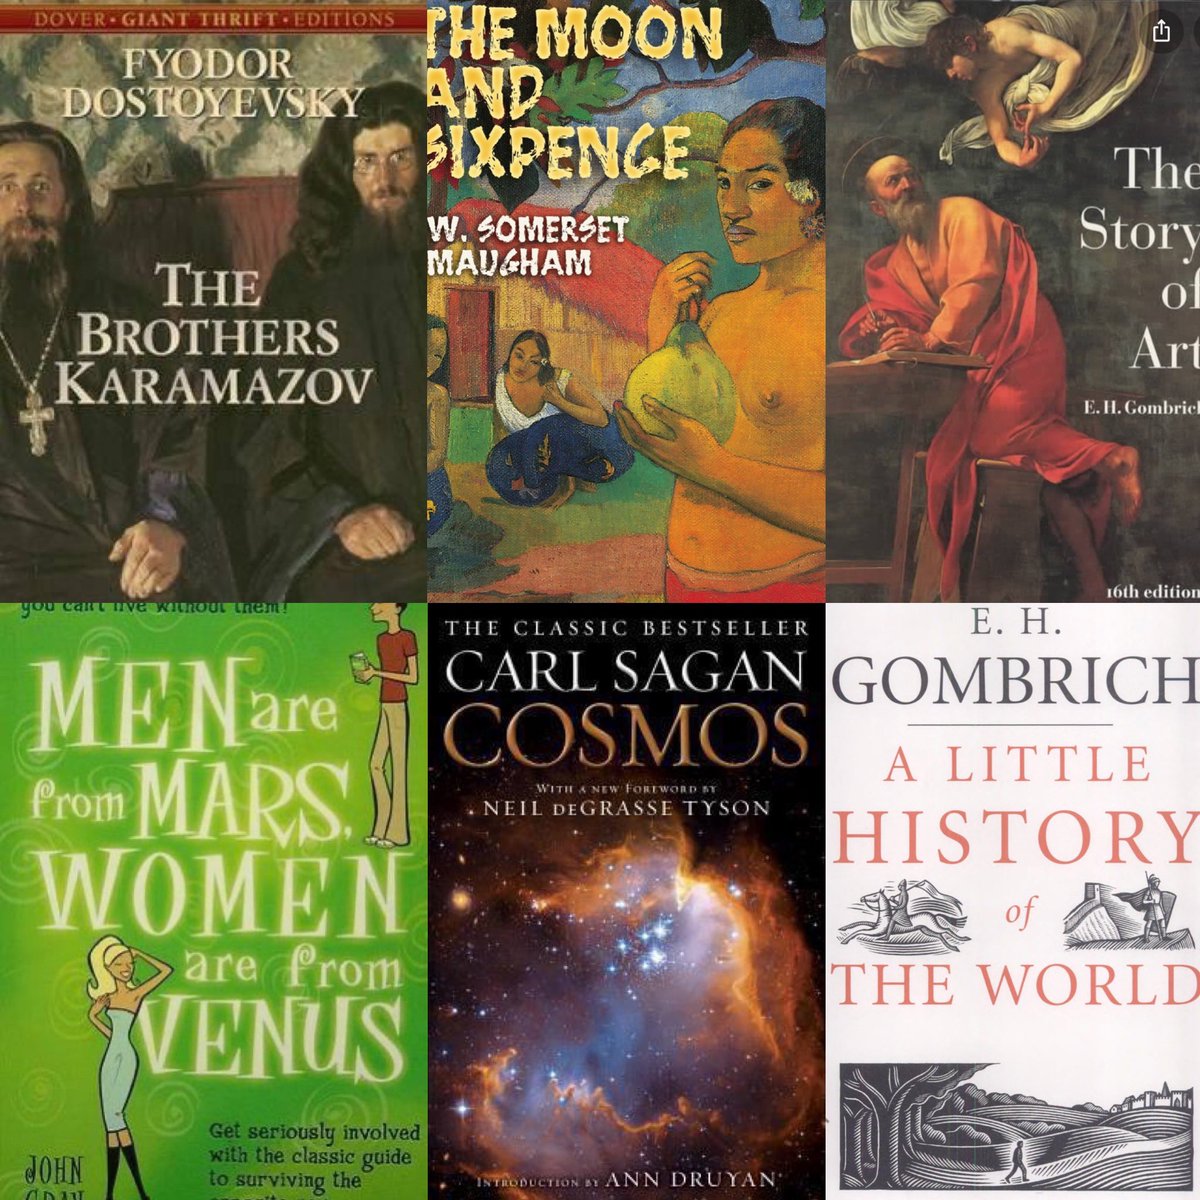 -The Moon and Sixpence by Somerset Maugham-The Brothers Karamazov by Fyodor Dostoyevsky-The Story of Artby Ernst Gombrich-Cosmos: A Personal Voyage by Carl Sagan-Men Are from Mars, Women Are from Venus by John Gray-A Little History of the World by Ernst Gombrich